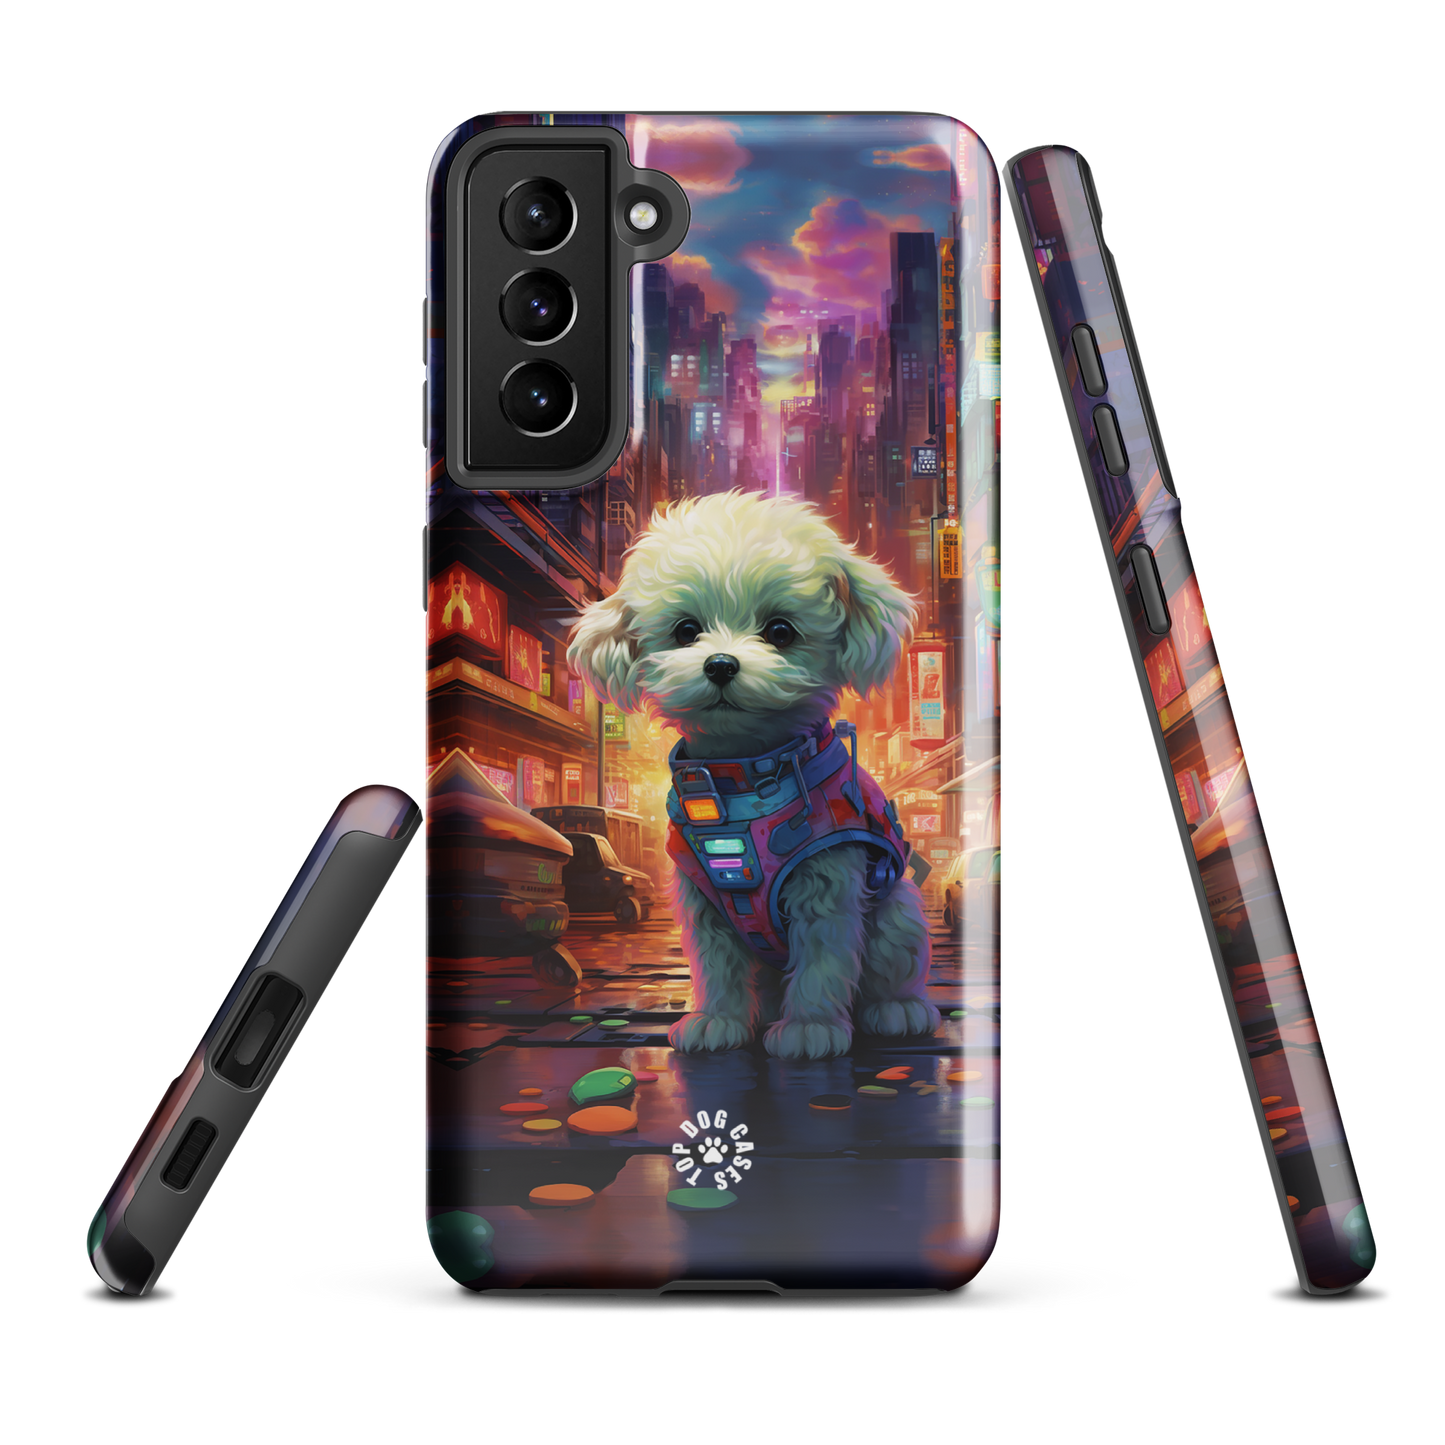 Toy Poodle Samsung Galaxy Case - City Dog - Top Dog Cases - #CityDogs, #CuteDogs, #SamsungGalaxyCase, #SamsungGalaxyS20, #SamsungGalaxyS21, #SamsungGalaxyS22, #SamsungGalaxyS22Ultra, #SamsungGalaxyS23, #SamsungGalaxyS23Ultra, #ToyPoodle